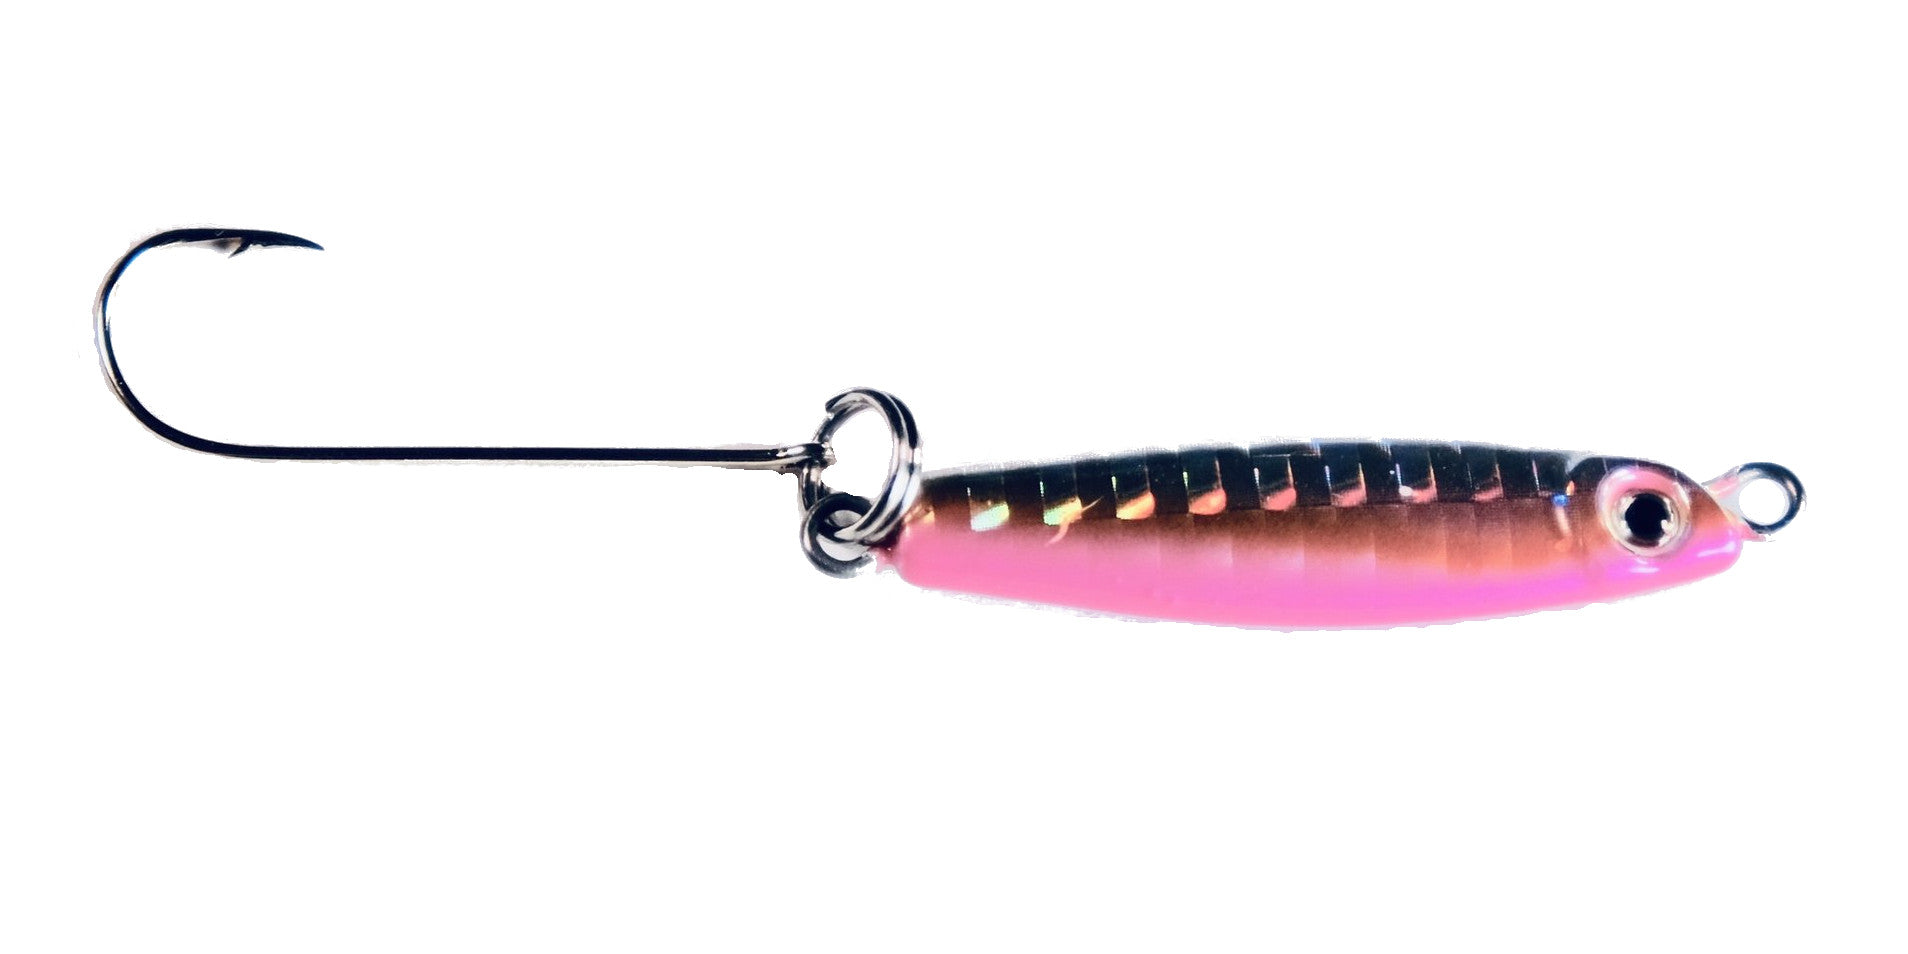 SHAD FRY Jelifish USA Snagless Crappie Bomb®